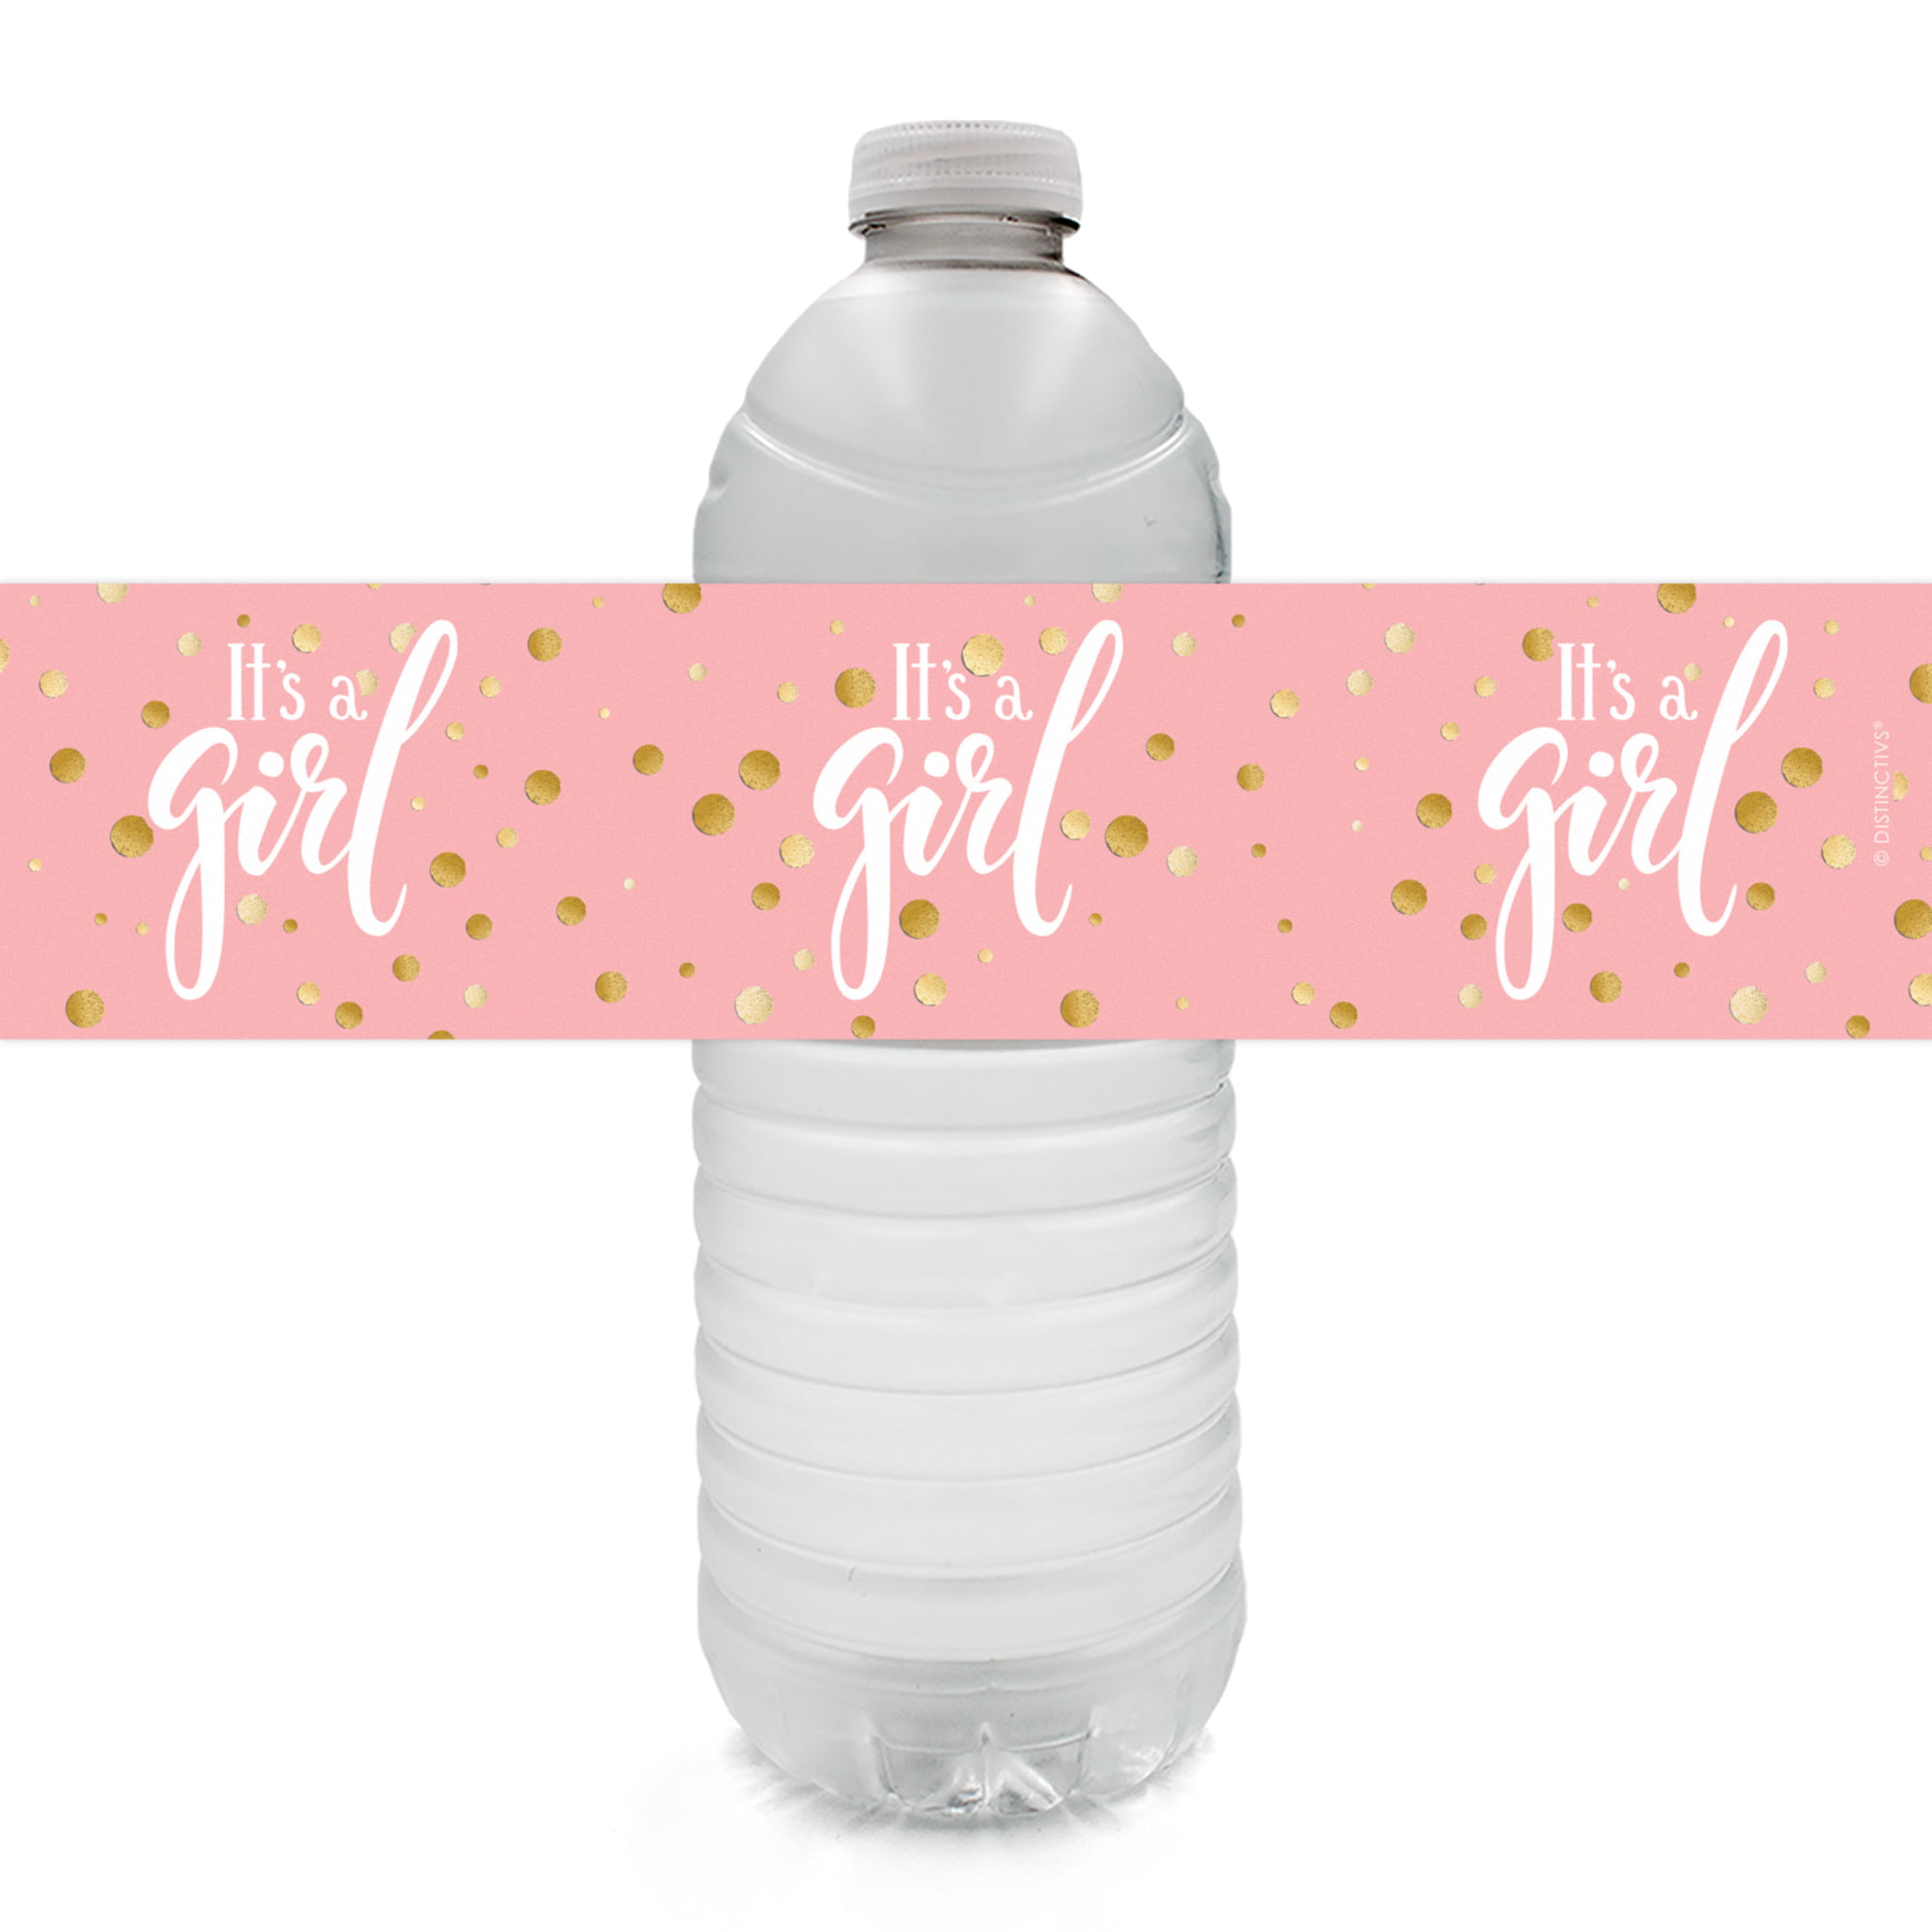 It's A Girl Water Bottle Labels Baby Shower 2 x 8 Inch 50 Total Stickers On A Roll 